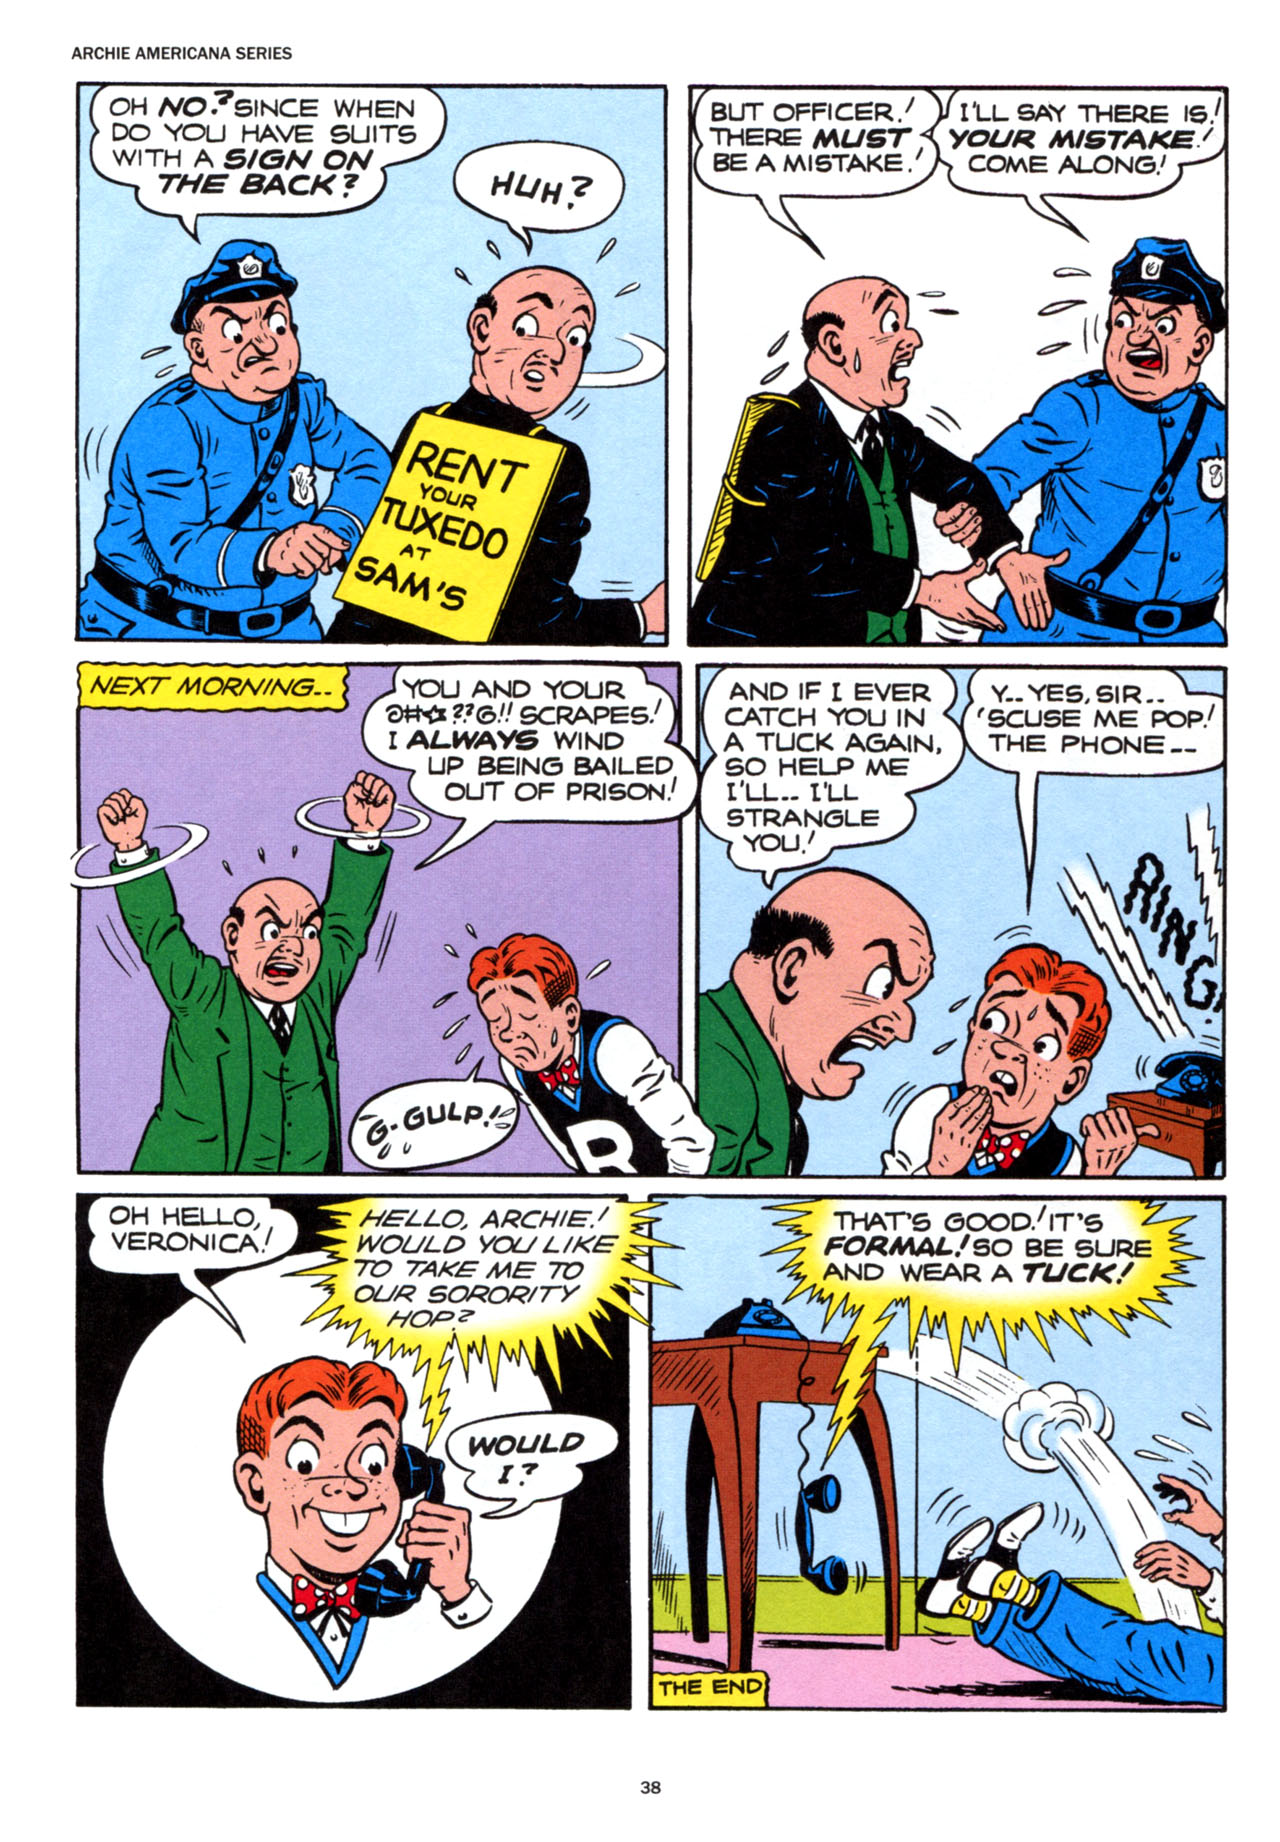 Read online Archie Americana Series comic -  Issue # TPB 6 - 39